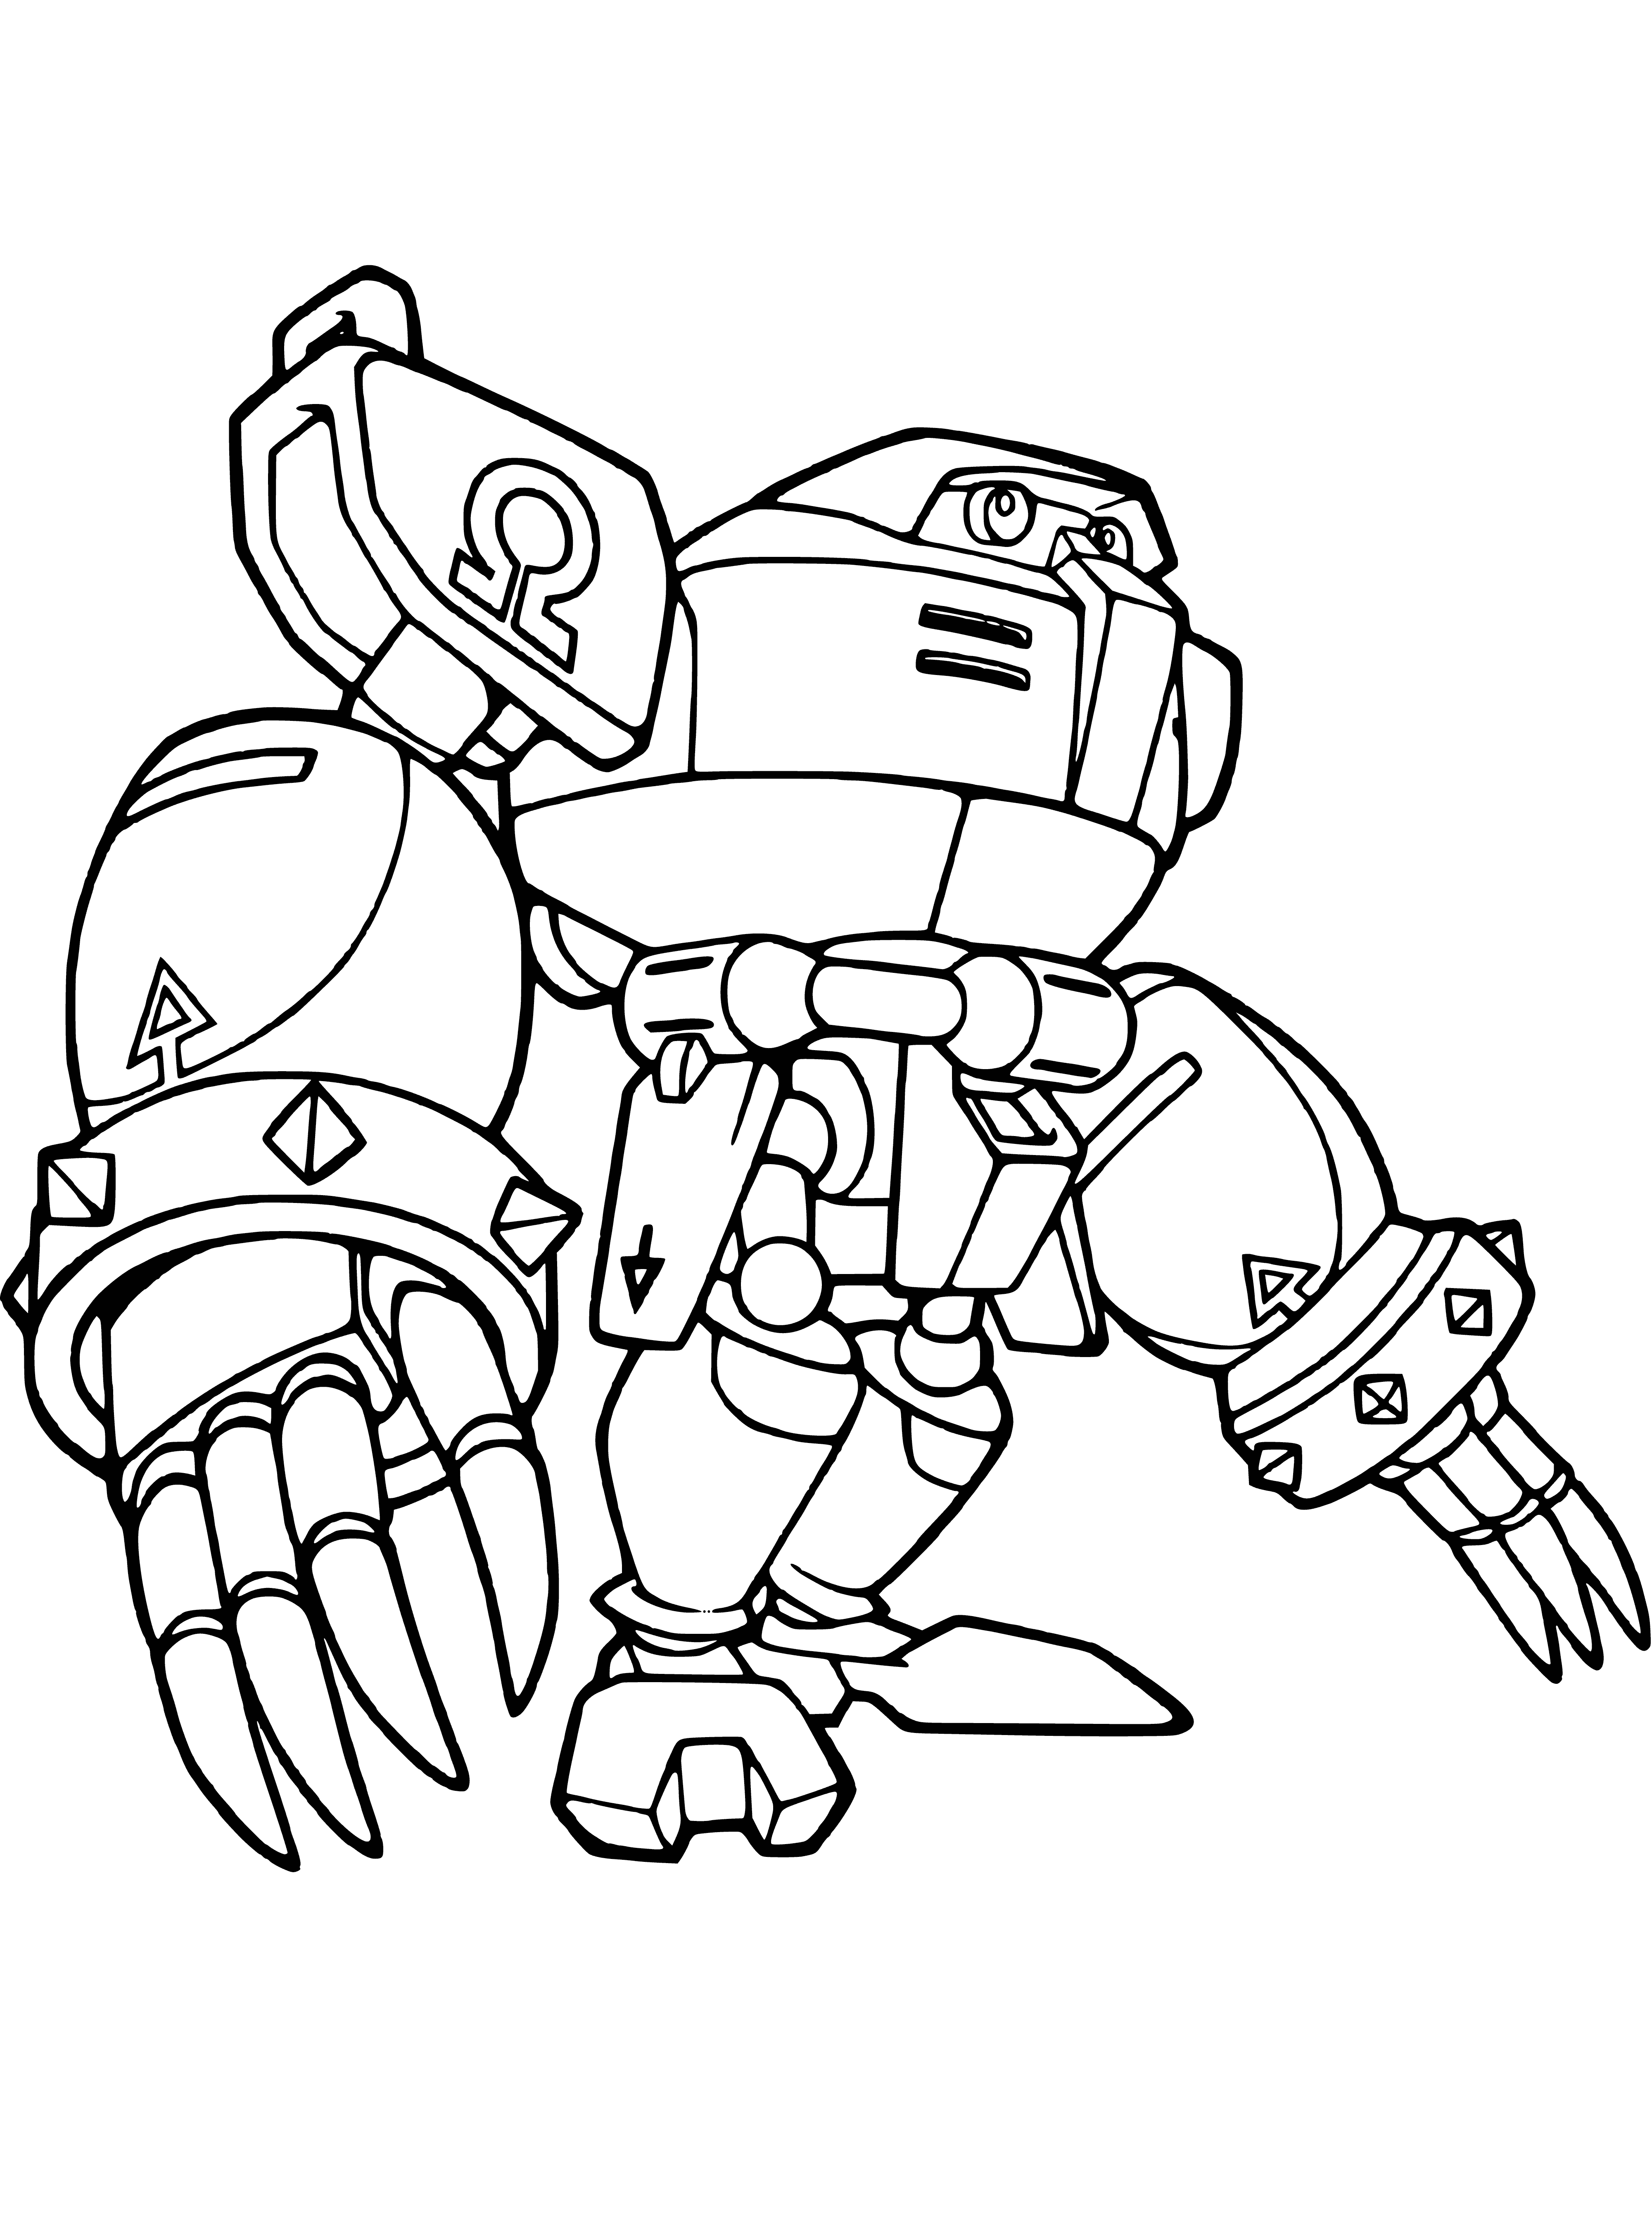 Omega robot coloring page